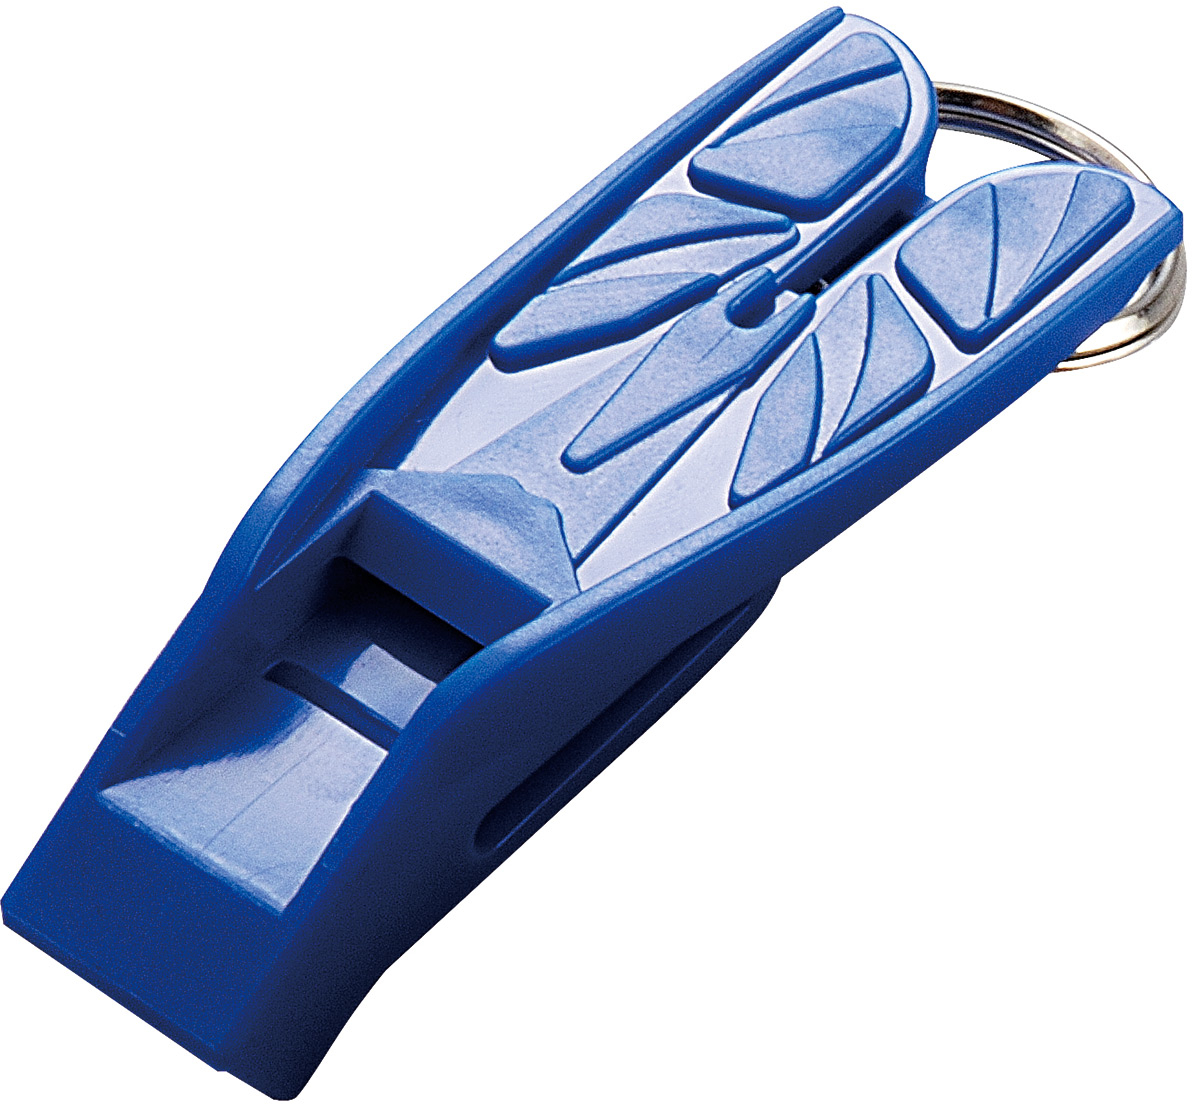 IST WH04 Split Fin Shaped Whistle Keychain